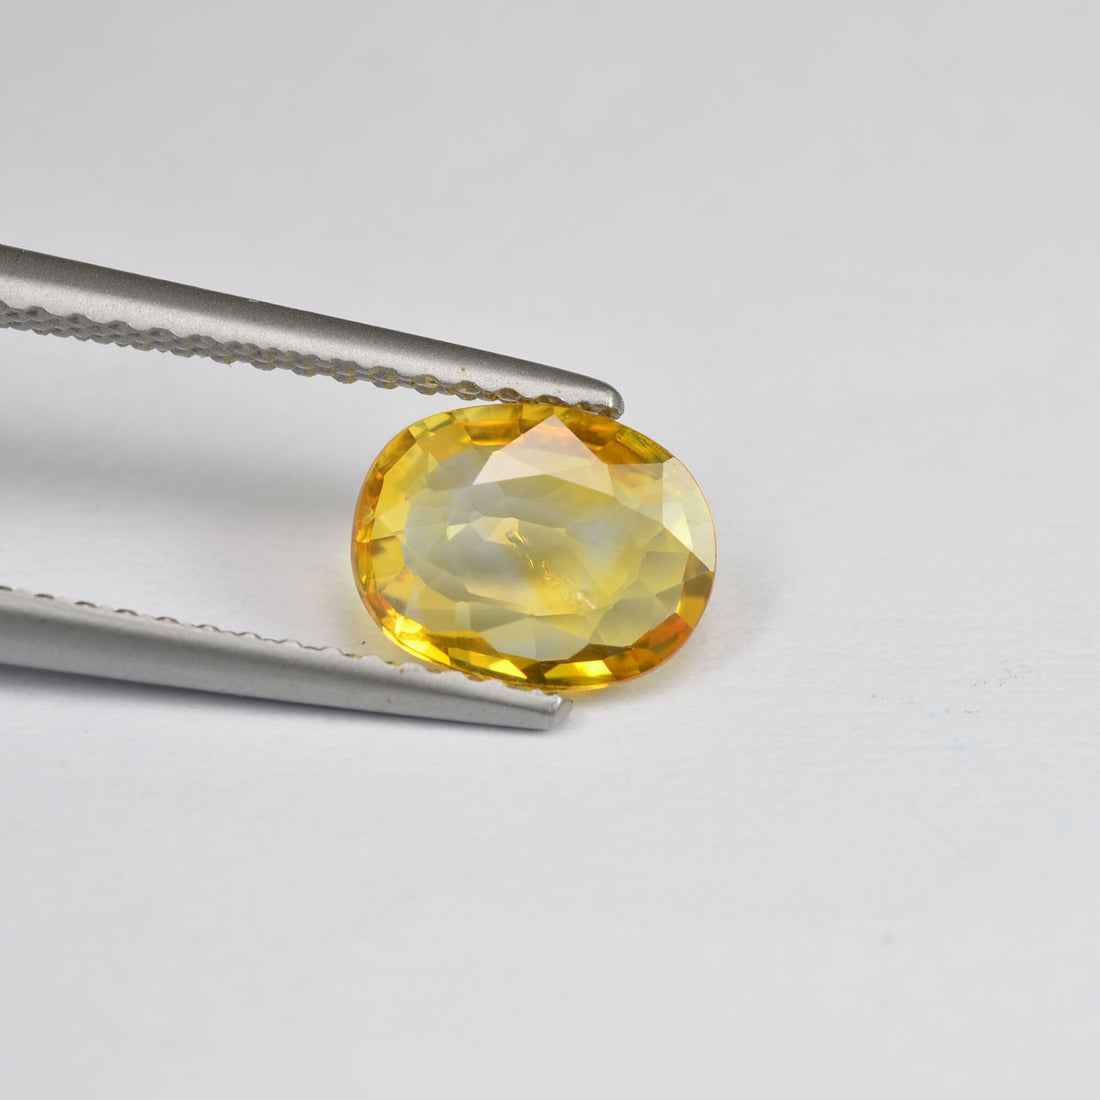 1.06 cts Natural Yellow Sapphire Loose Gemstone Oval Cut